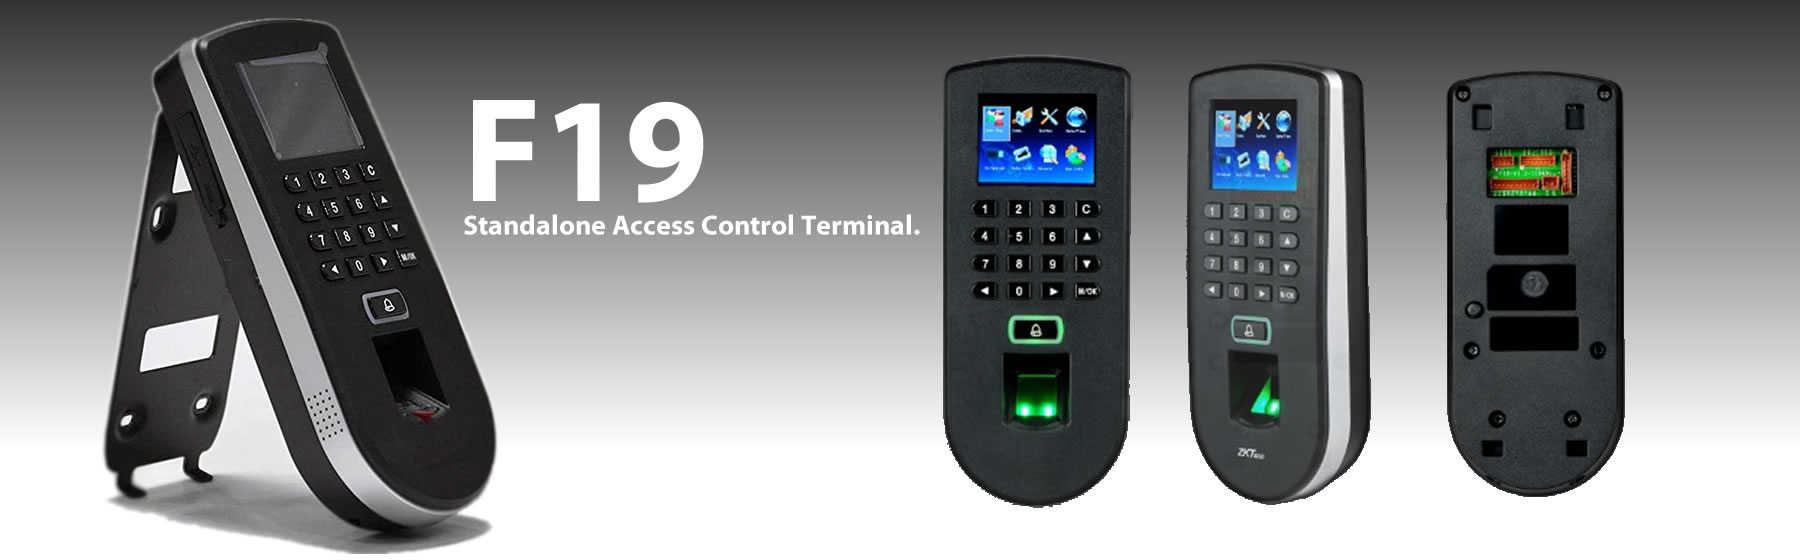 f19 access control banner